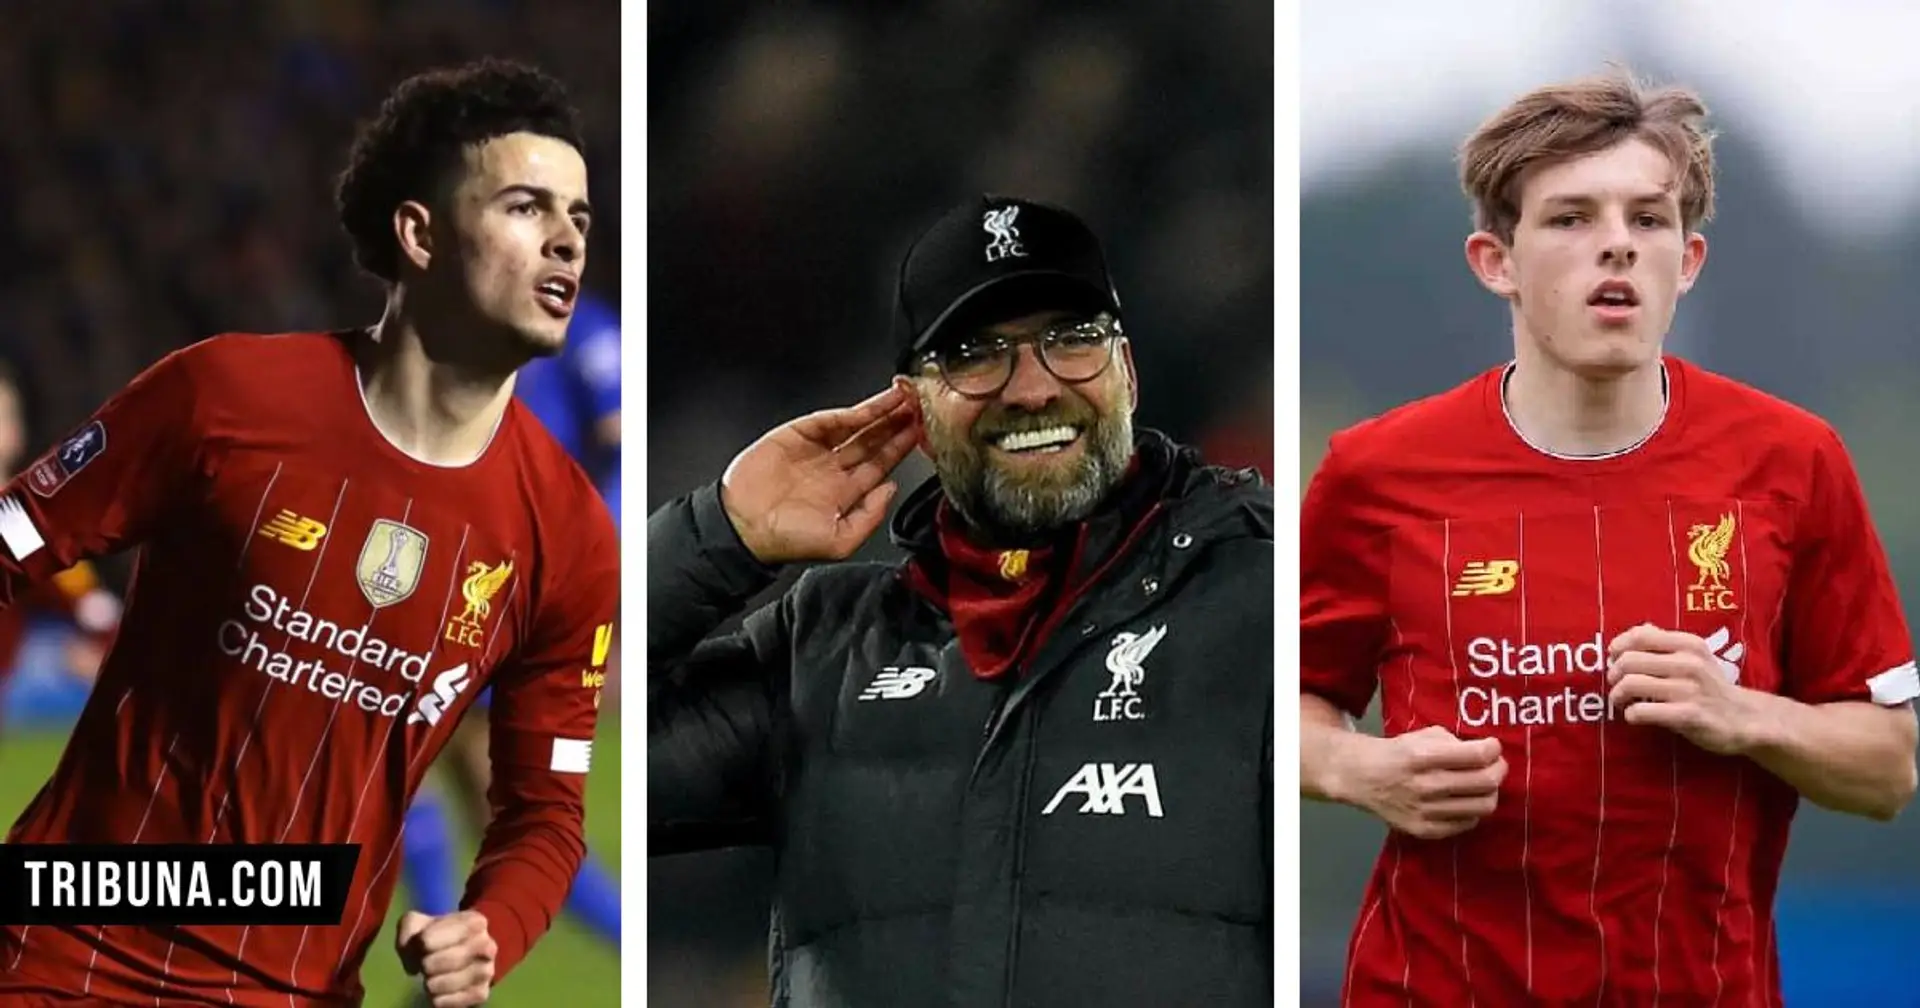 All of the boys did well, really well: Jurgen Klopp gives his assessment of academy players in Blackburn victory